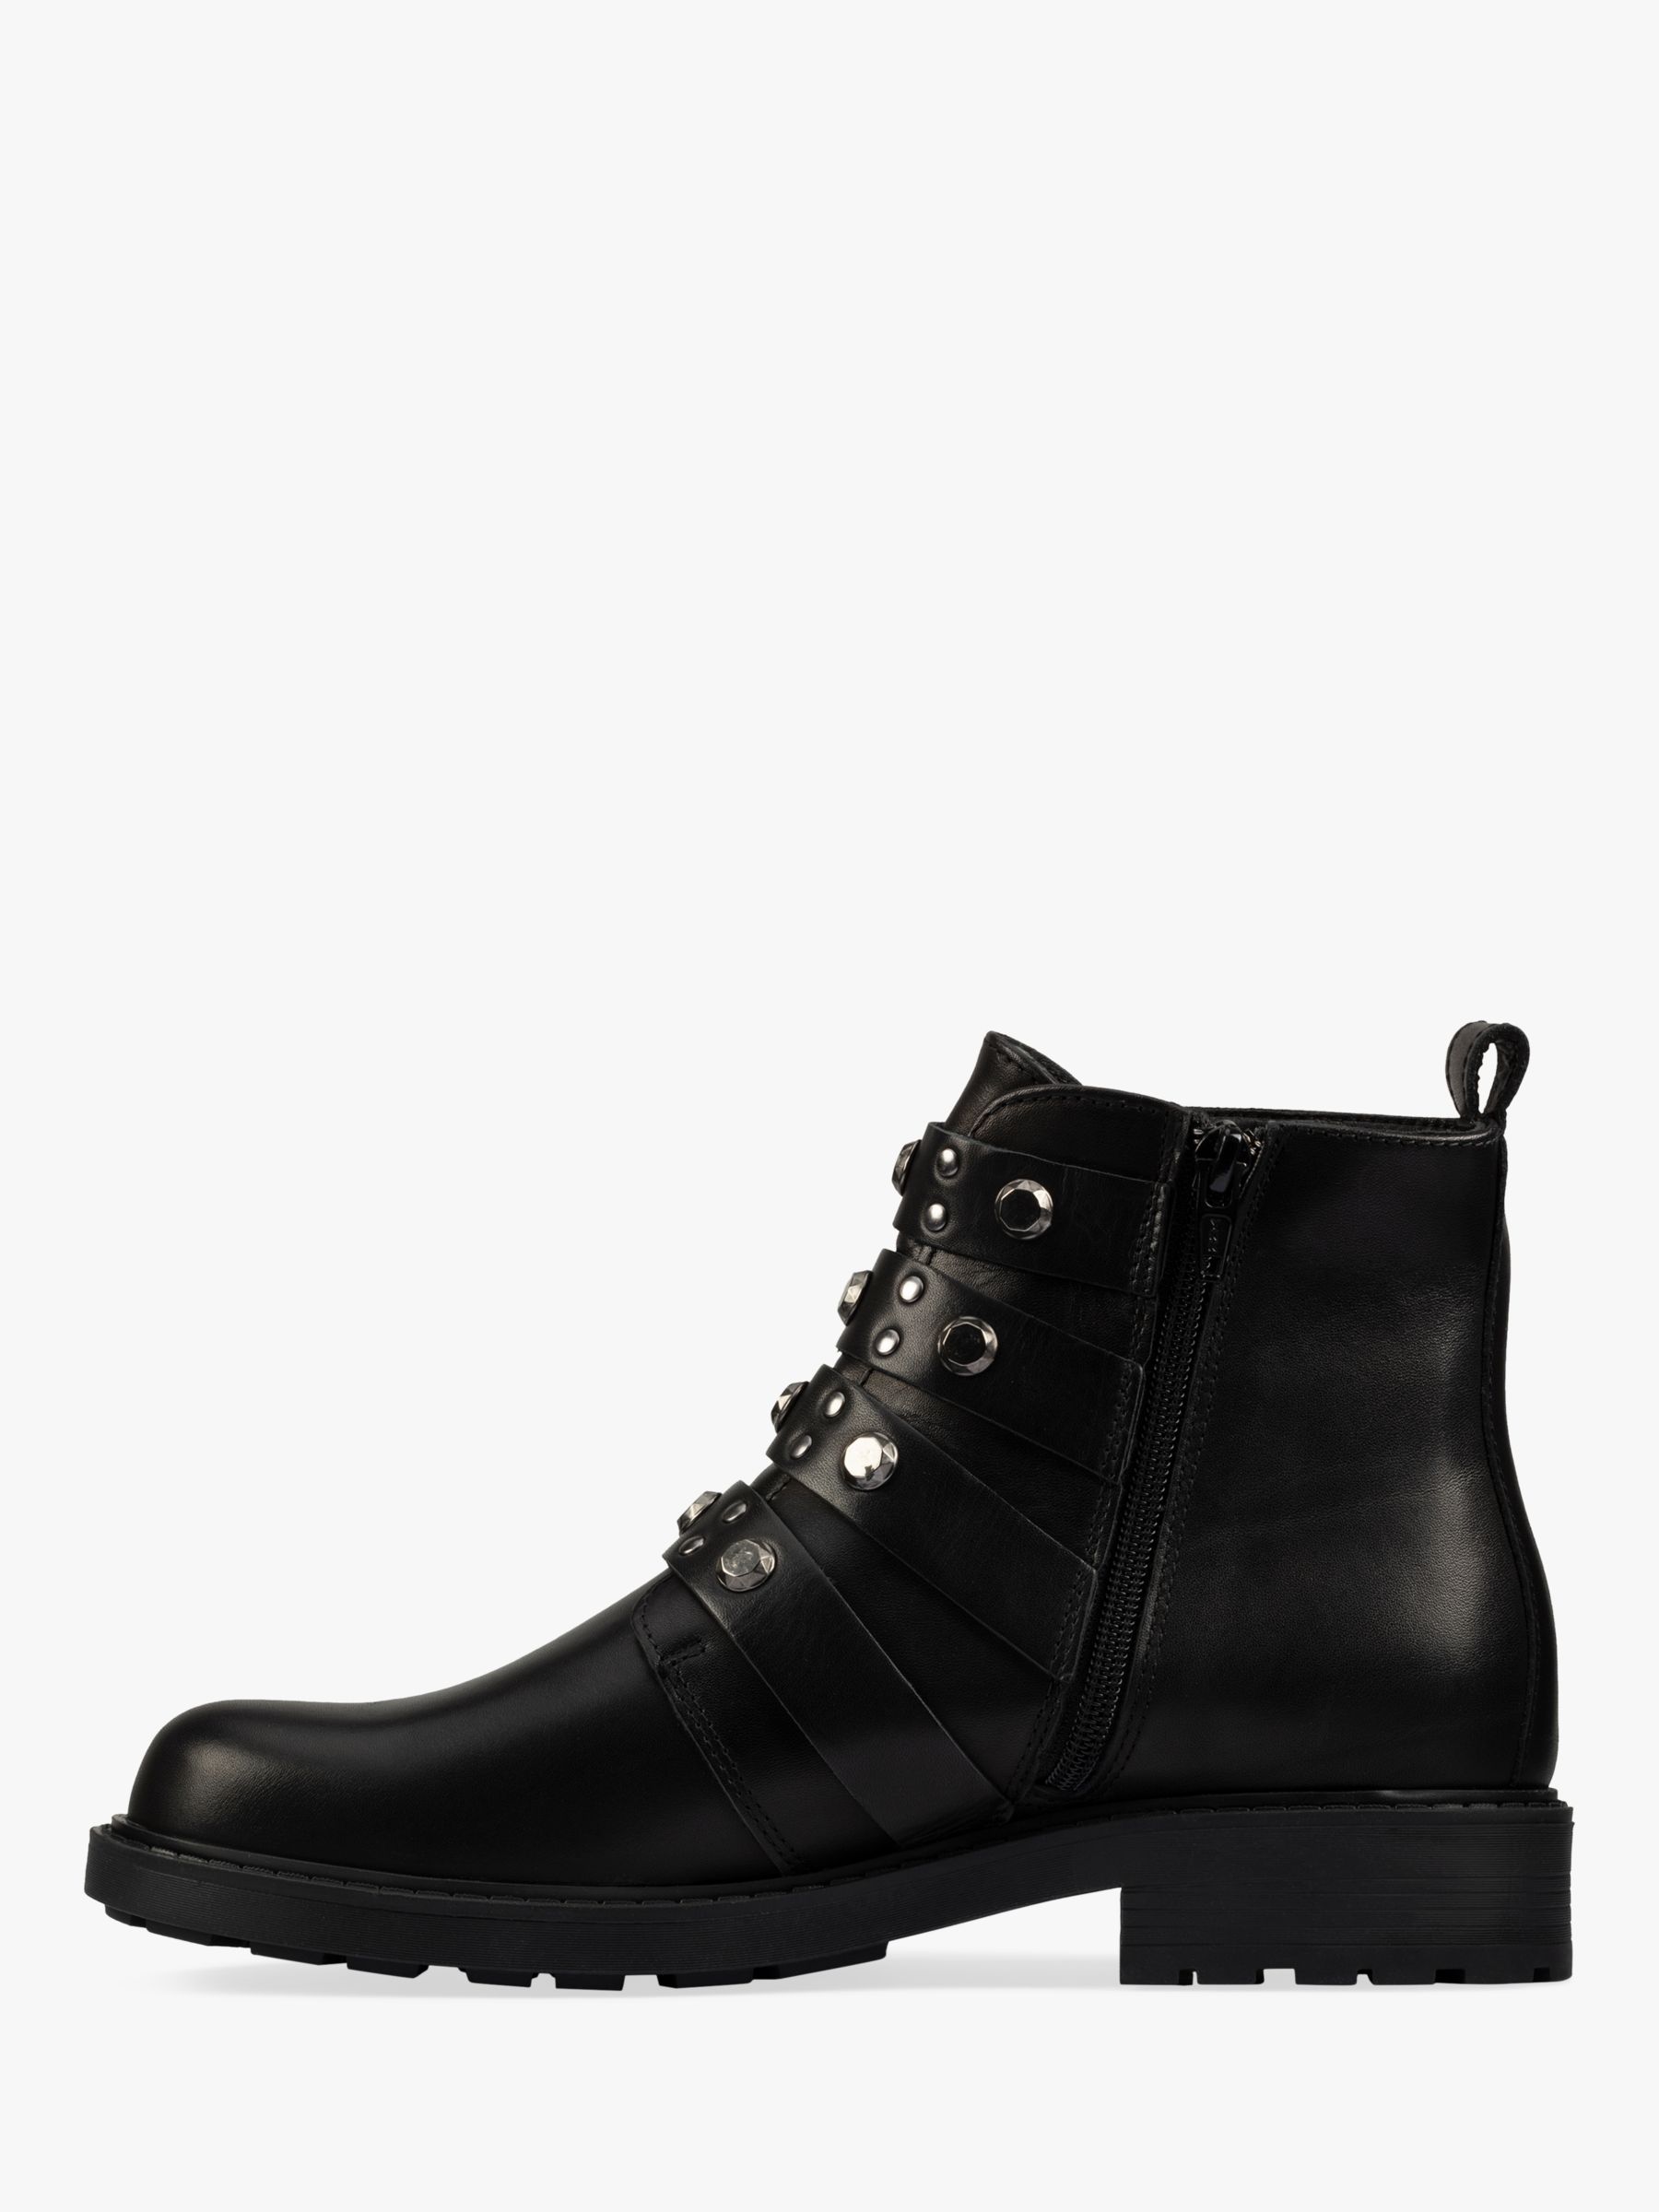 Clarks Orinoco 2 Leather Buckle Ankle Boots, Black